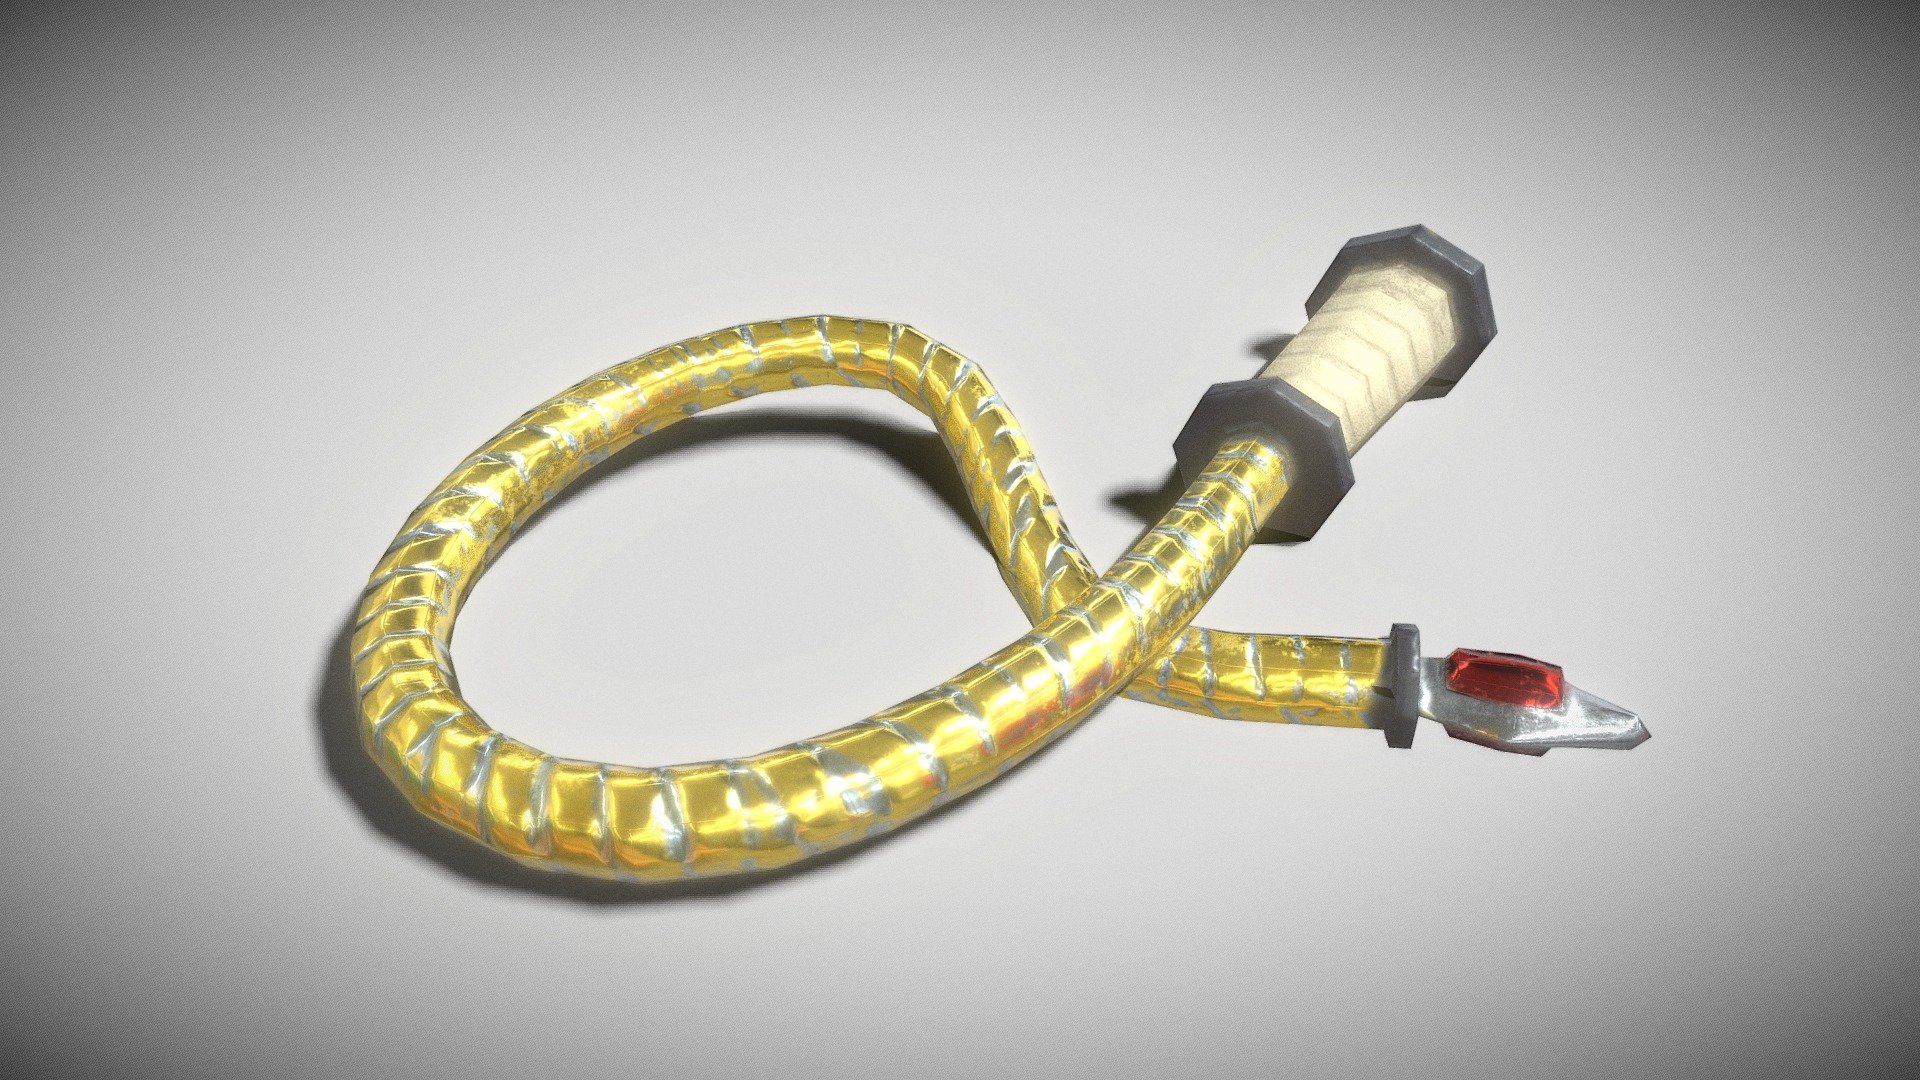 Whip lowpoly for video games 3d model